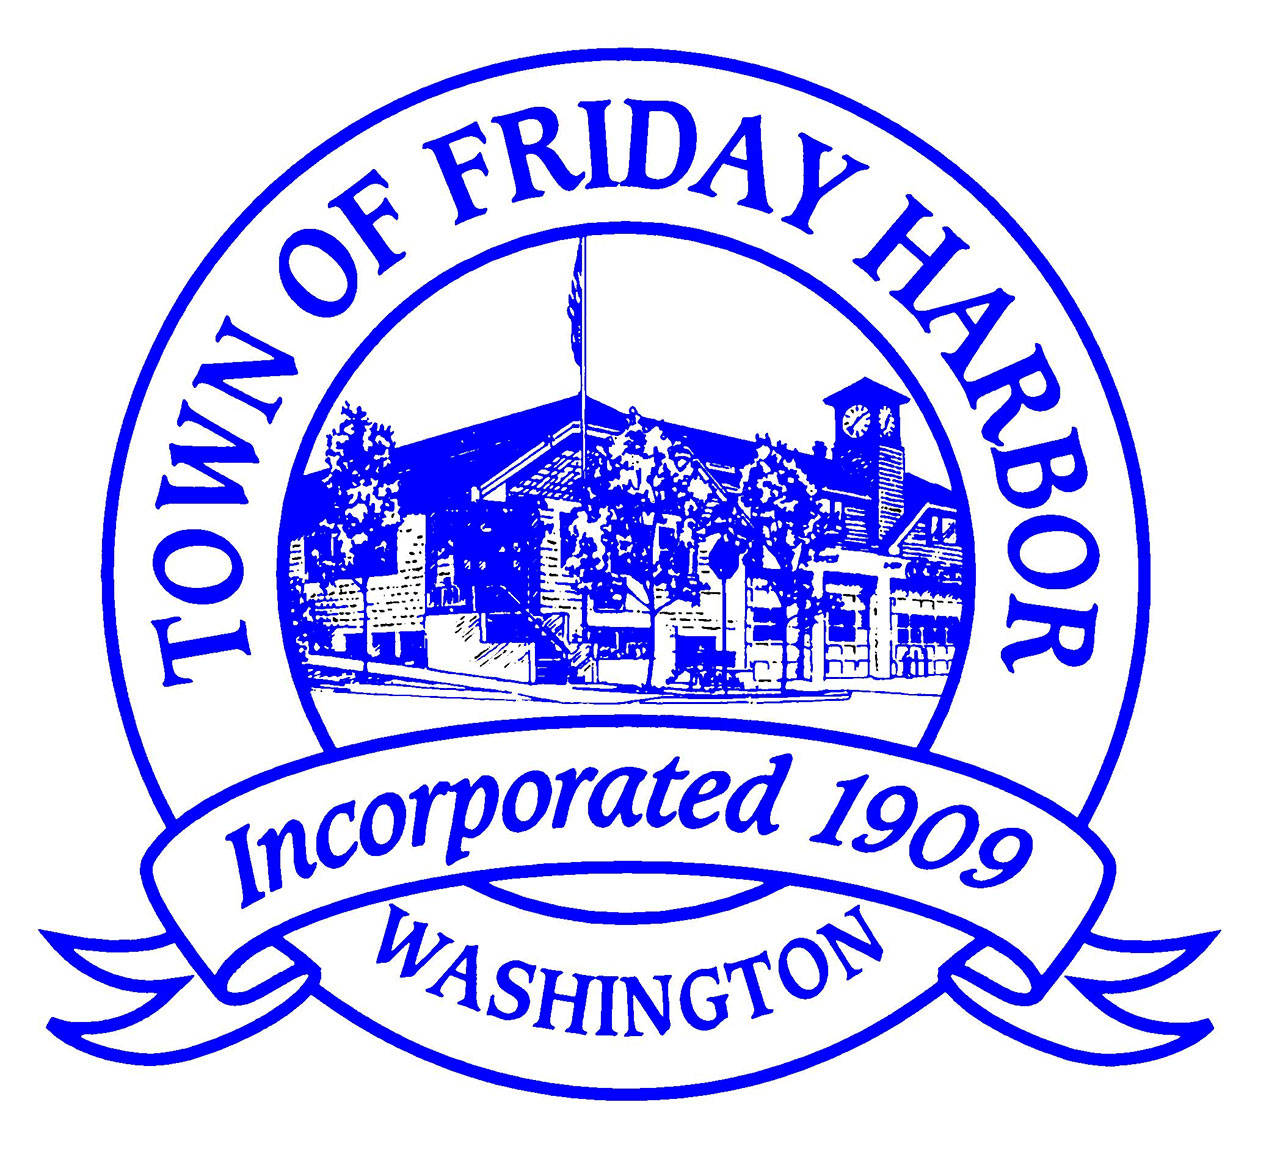 Signs missing in Friday Harbor mayoral race